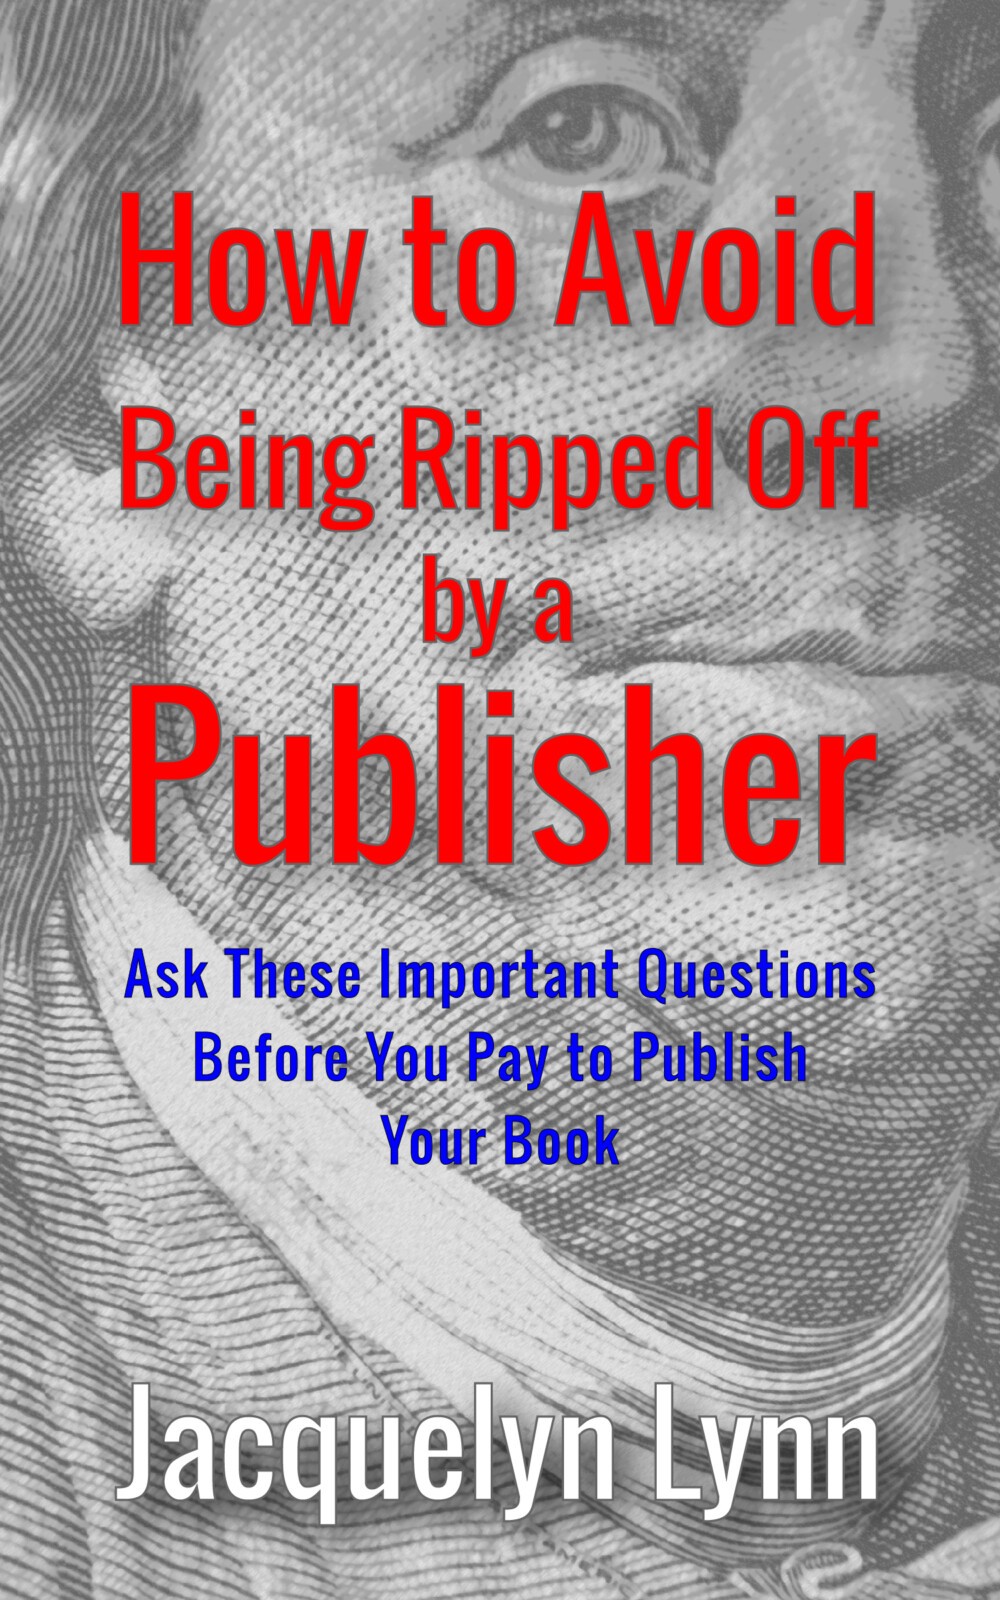 How to Avoid Being Ripped Off by a Publisher - Jacquelyn Lynn (book cover)